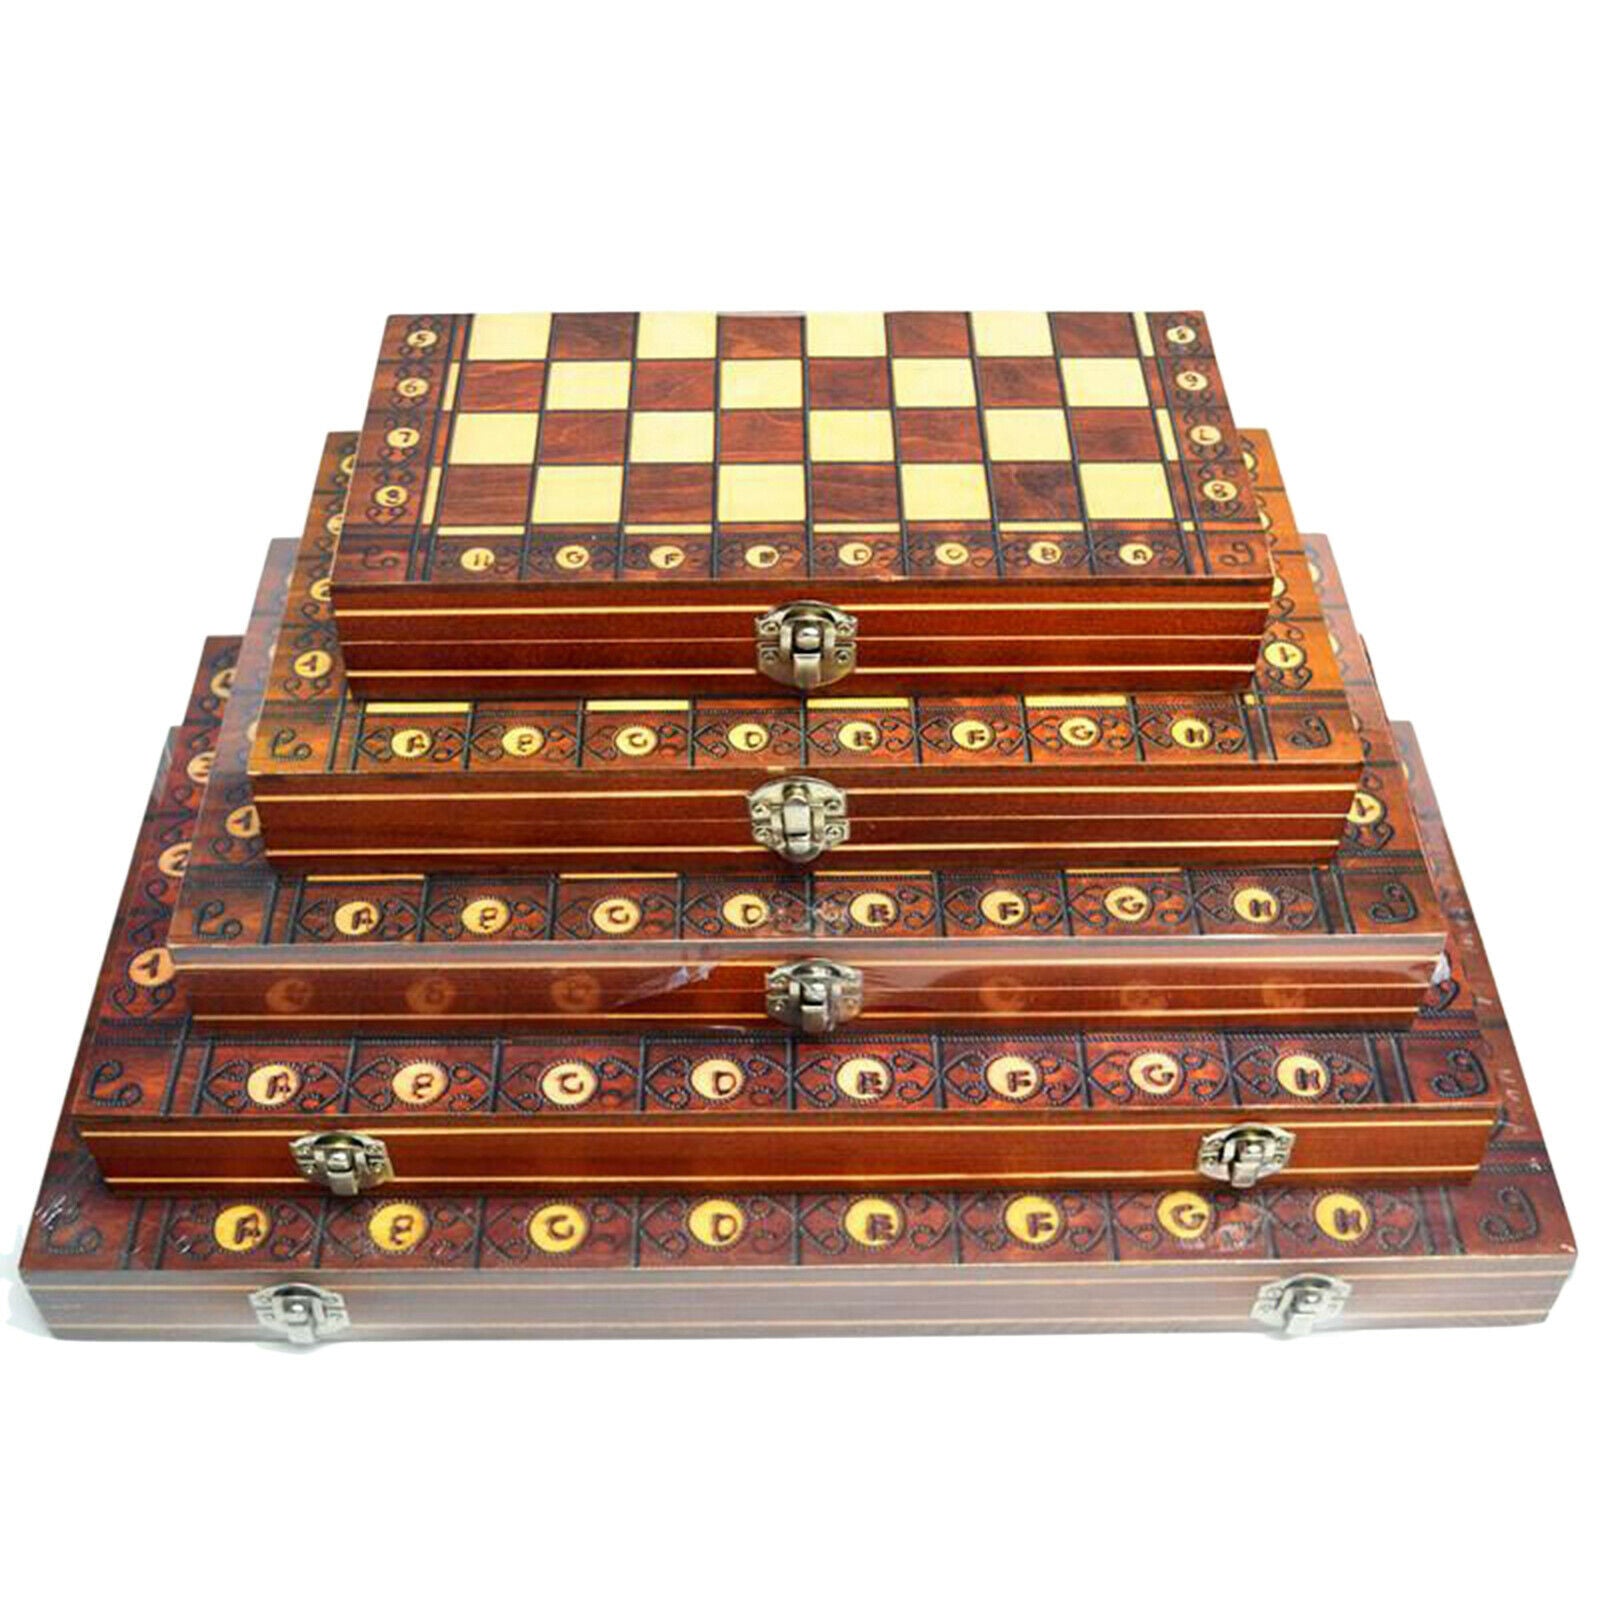 Travel Folding Magnetic Wooden Chess Set   Handcrafted 15" Chess Board